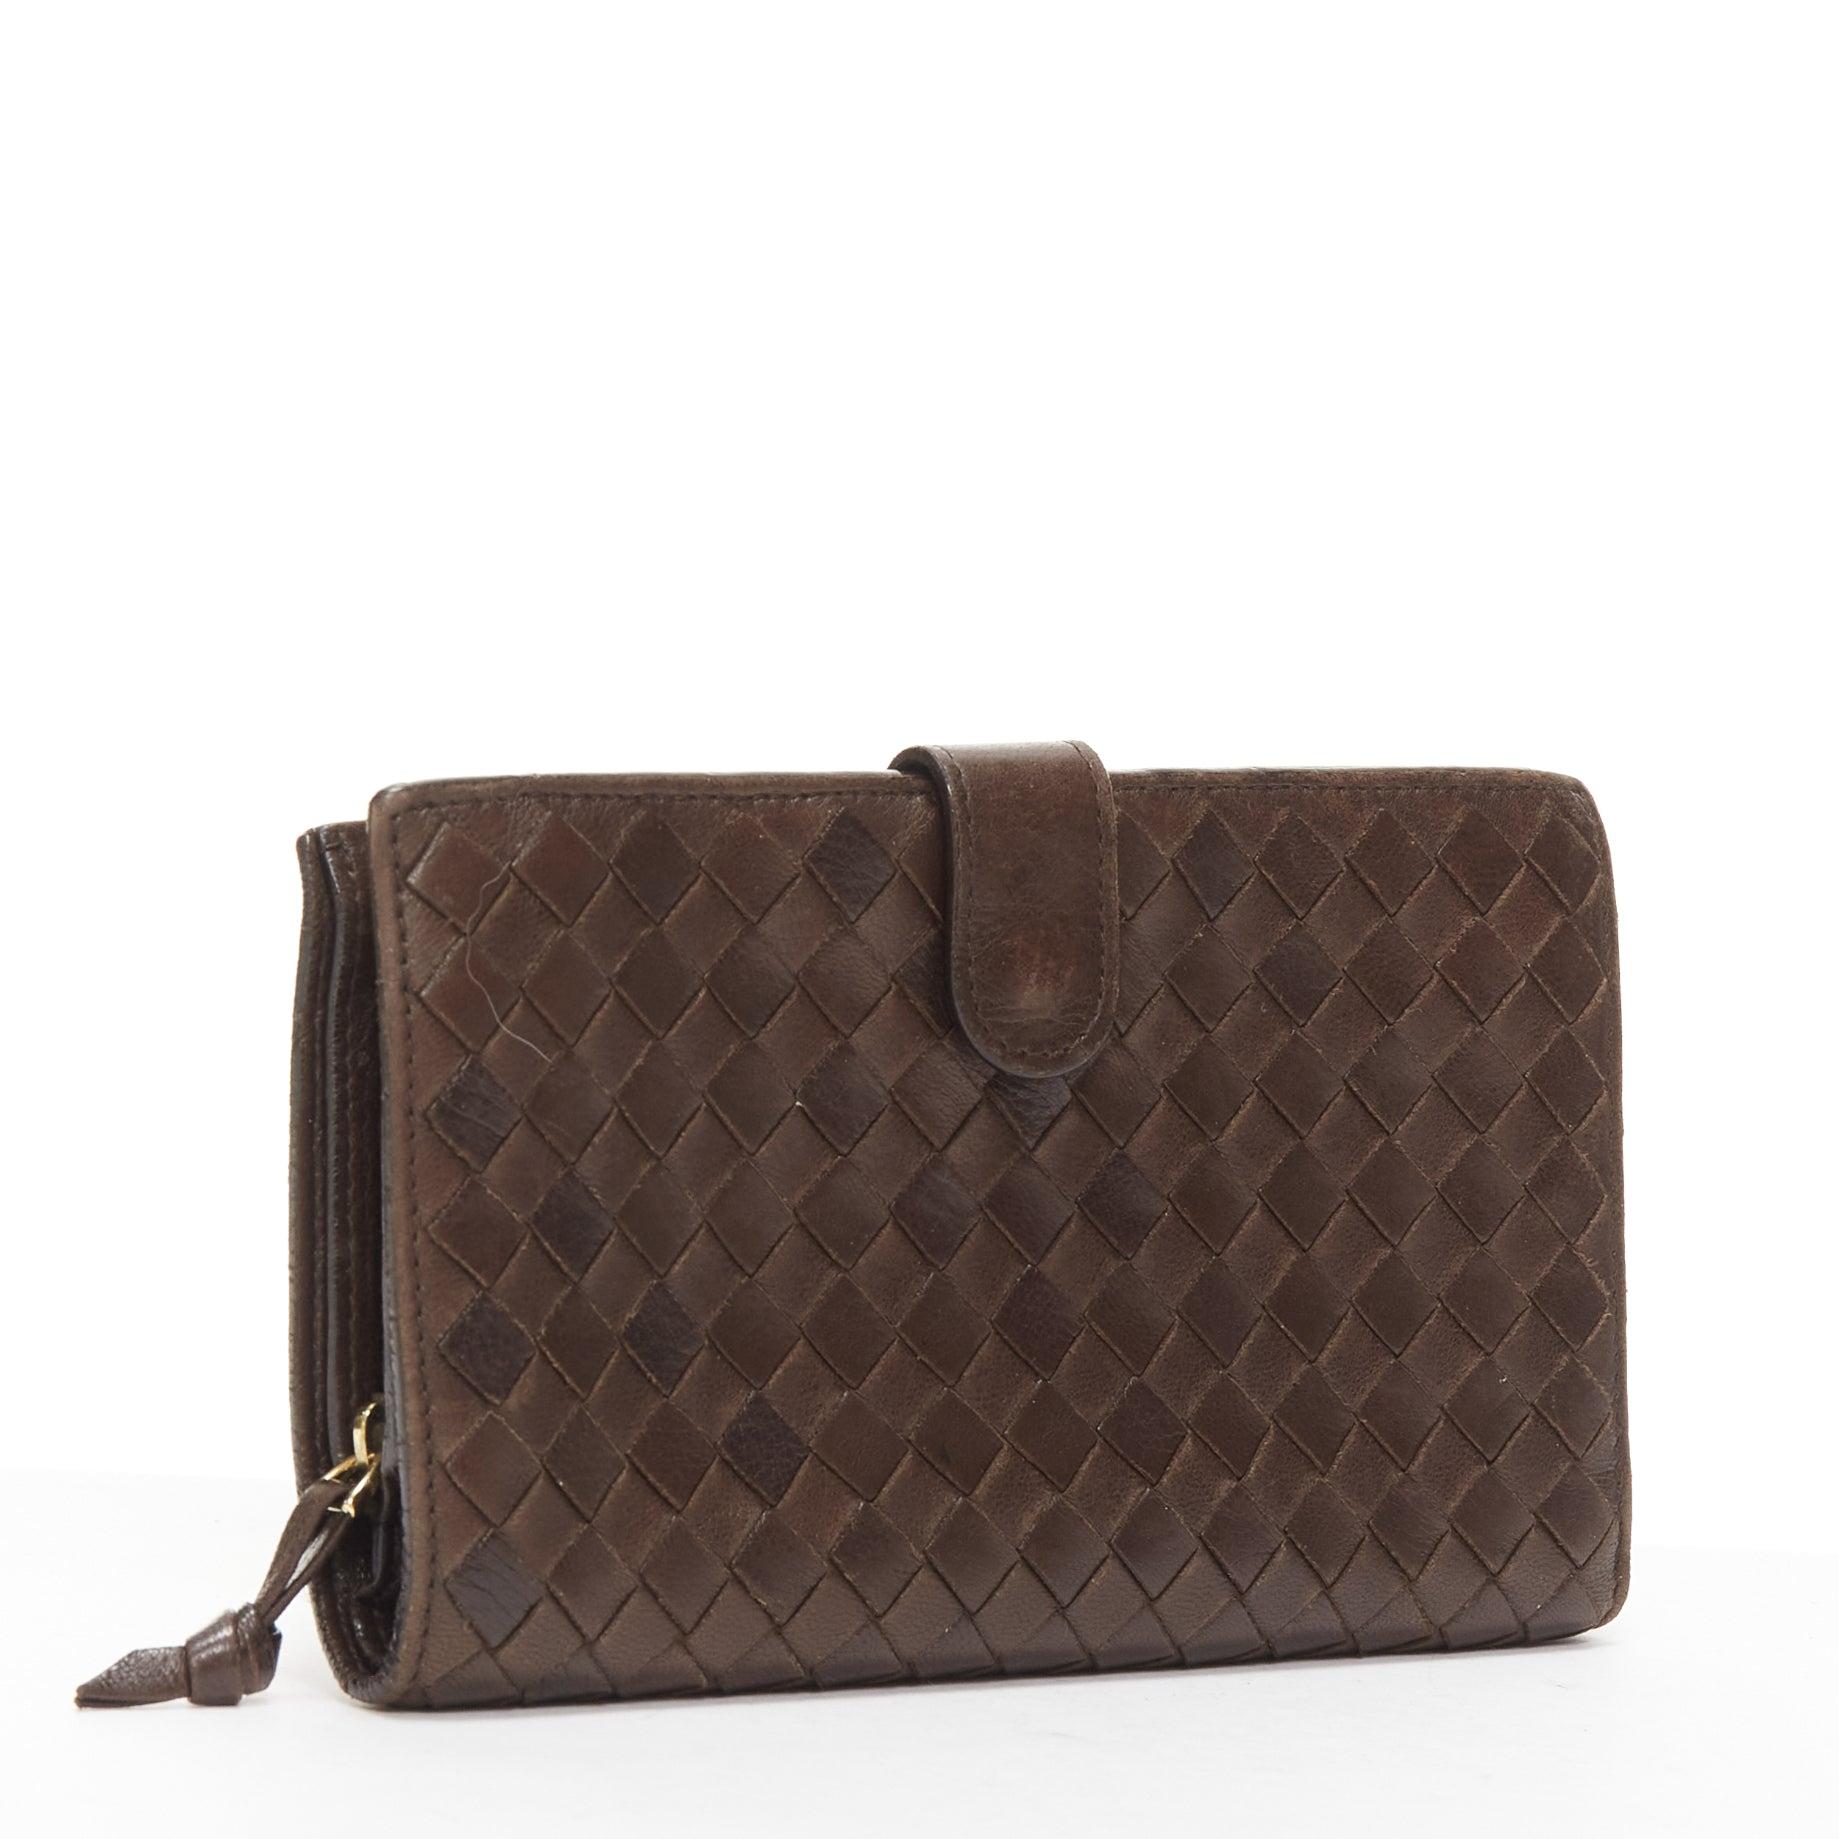 BOTTEGA VENETA brown woven intrecciato leather gold zip long wallet
Reference: NILI/A00047
Brand: Bottega Veneta
Material: Leather
Color: Brown
Pattern: Solid
Closure: Snap Buttons
Lining: Brown Leather
Extra Details: Card slot and coin